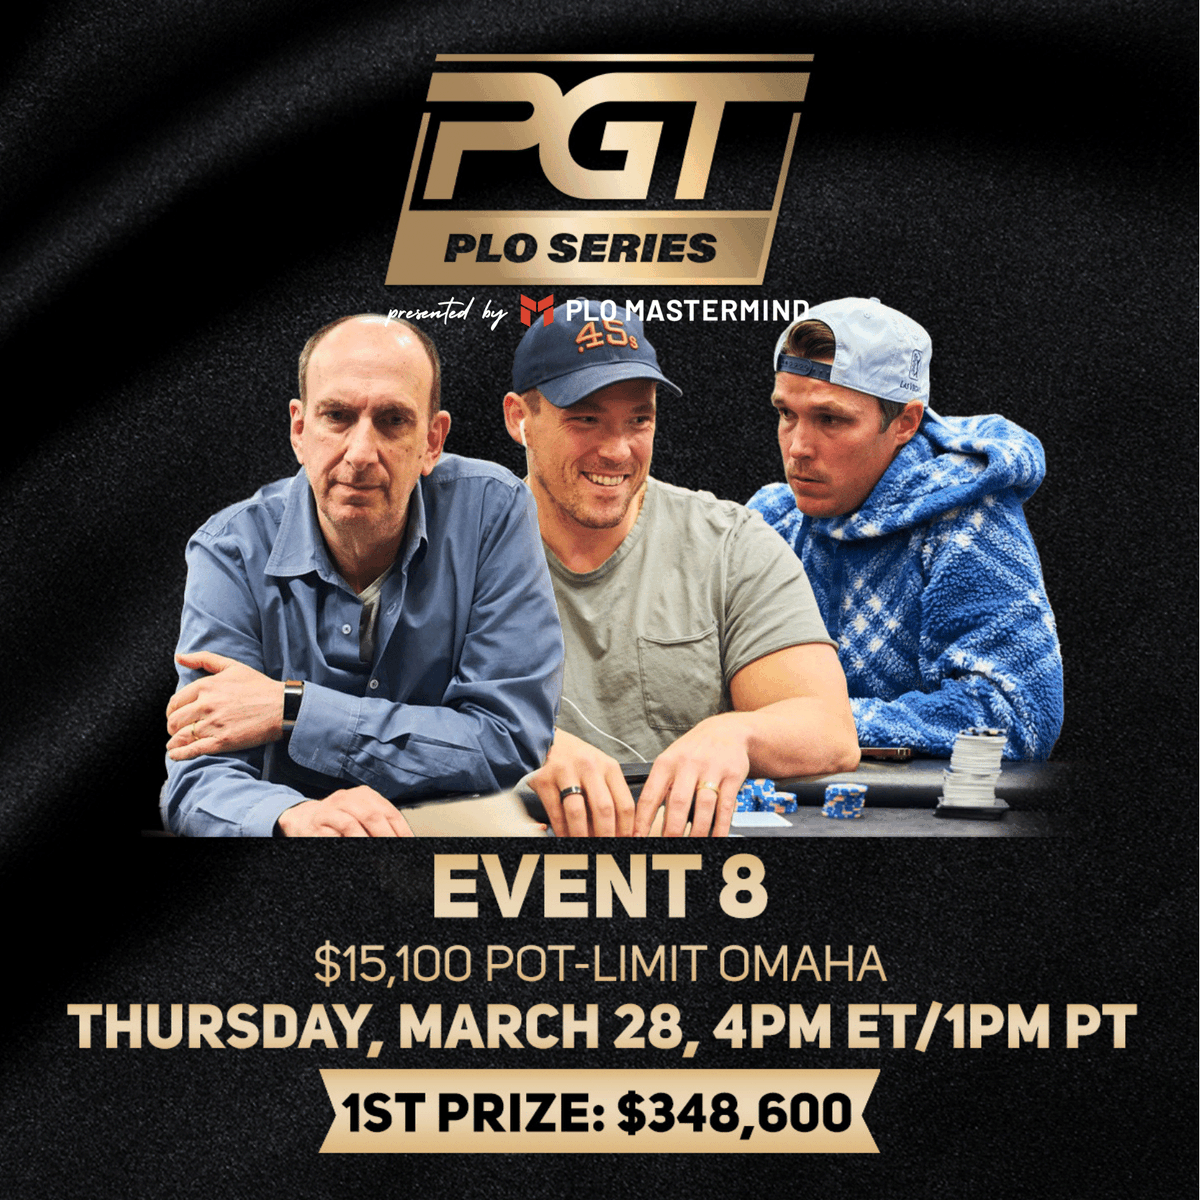 .@WAFoxen leads the Event 8 final table from the @PokerGOTour PLO Series presented by @PLOMastermind. @Erik_Seidel comes in as the shortest stack. Livestream today at 4PM ET / 1PM PT - $348,600 up top. 📺 - Watch: bit.ly/PGTPLO24-E08